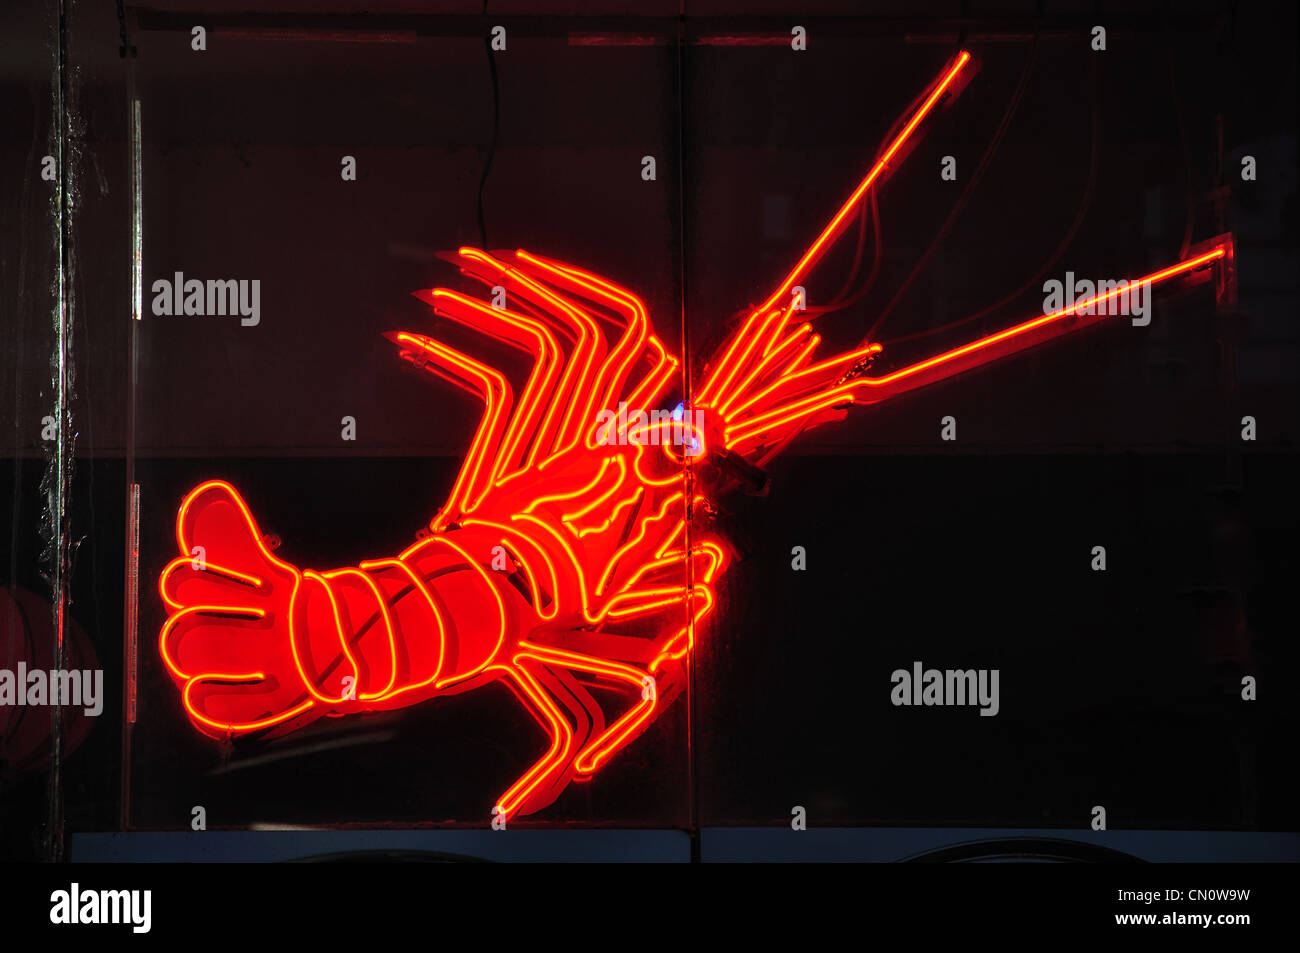 Neon lobster sign outside seafood restaurant, Quay Street, Haymarket, Sydney, New South Wales, Australia Stock Photo